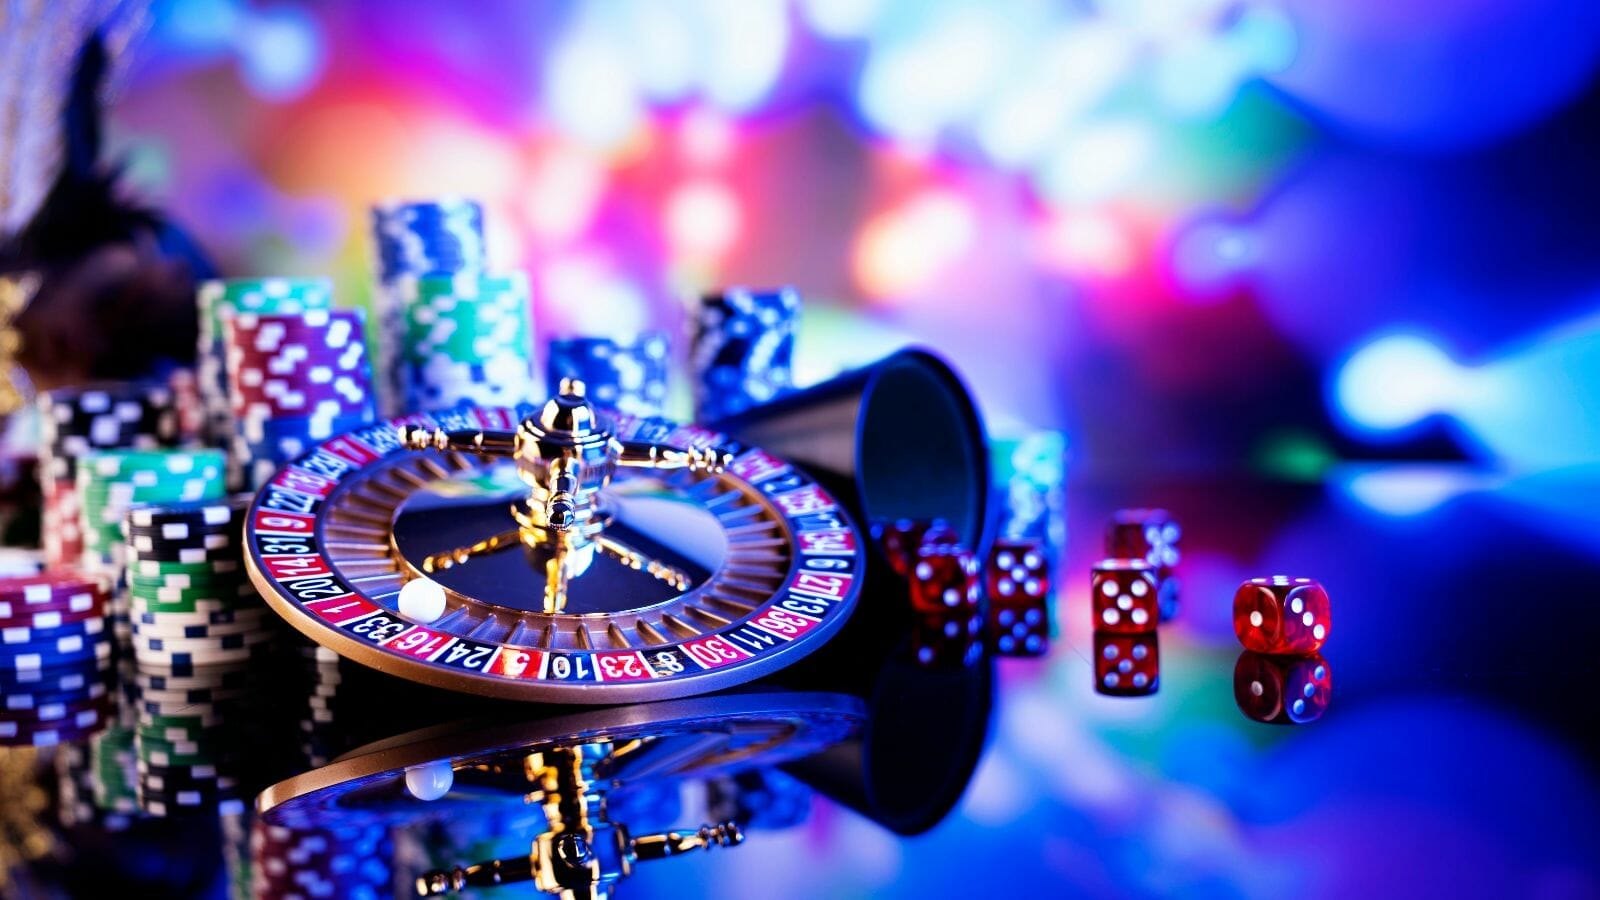 A roulette wheel and dice

